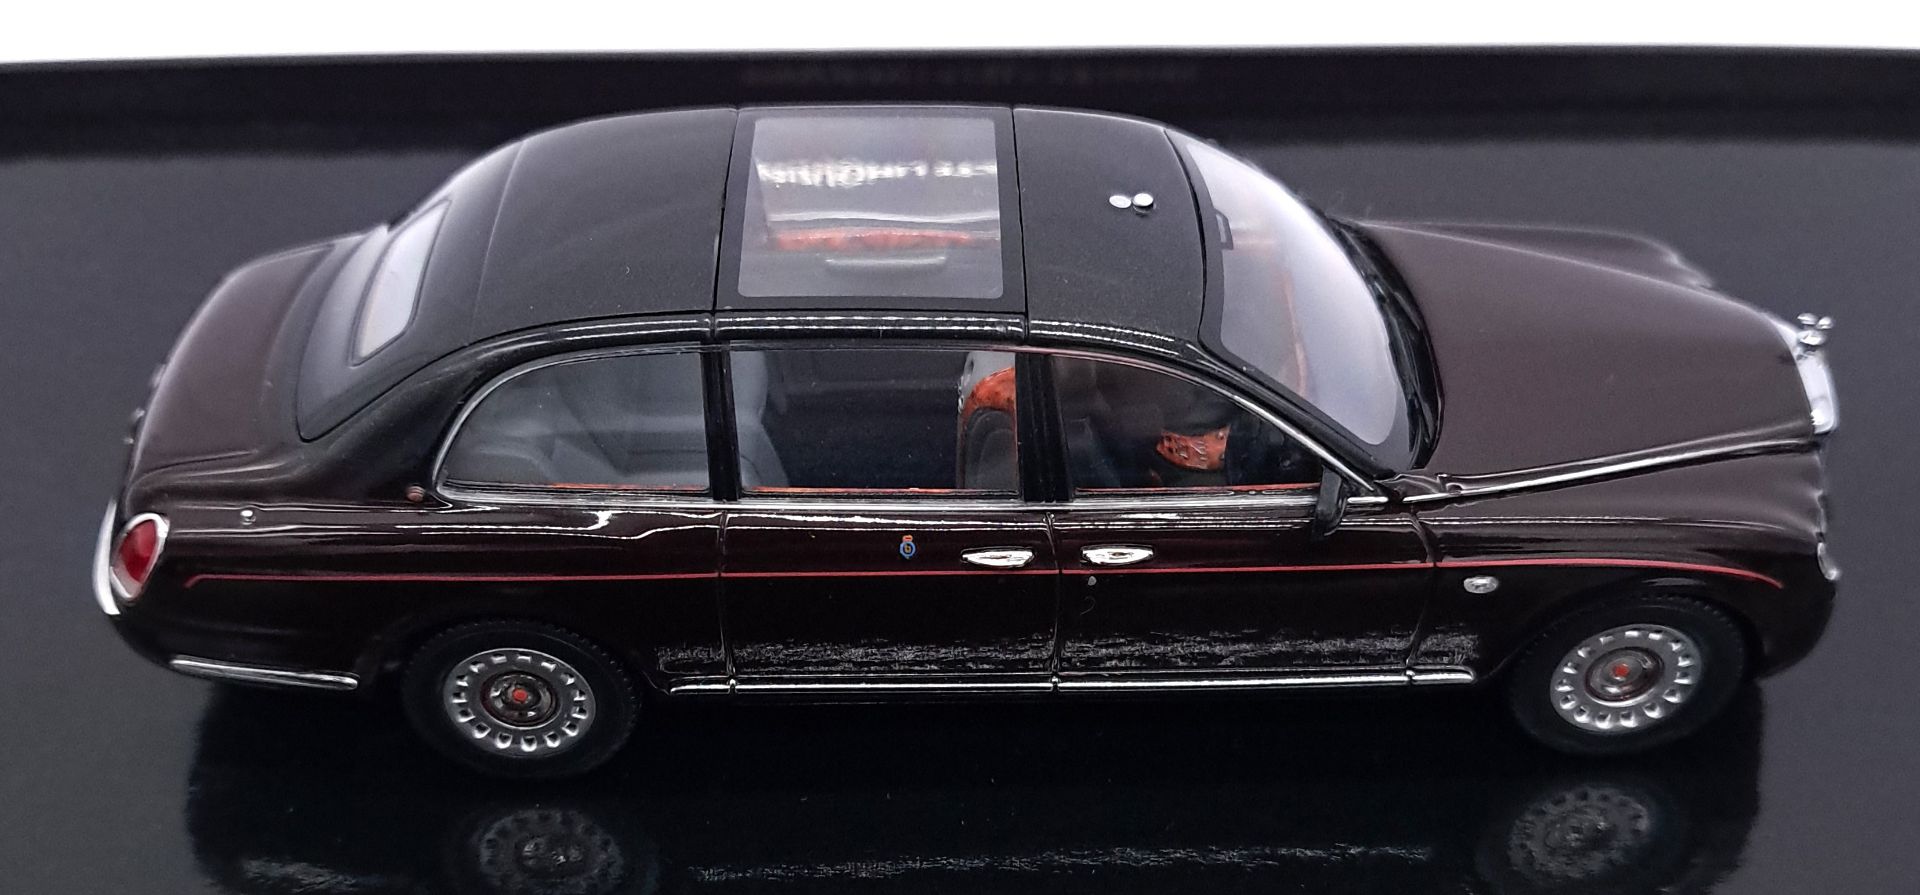 Minichamps 1/43rd scale Bentley State Limousine - Image 4 of 6